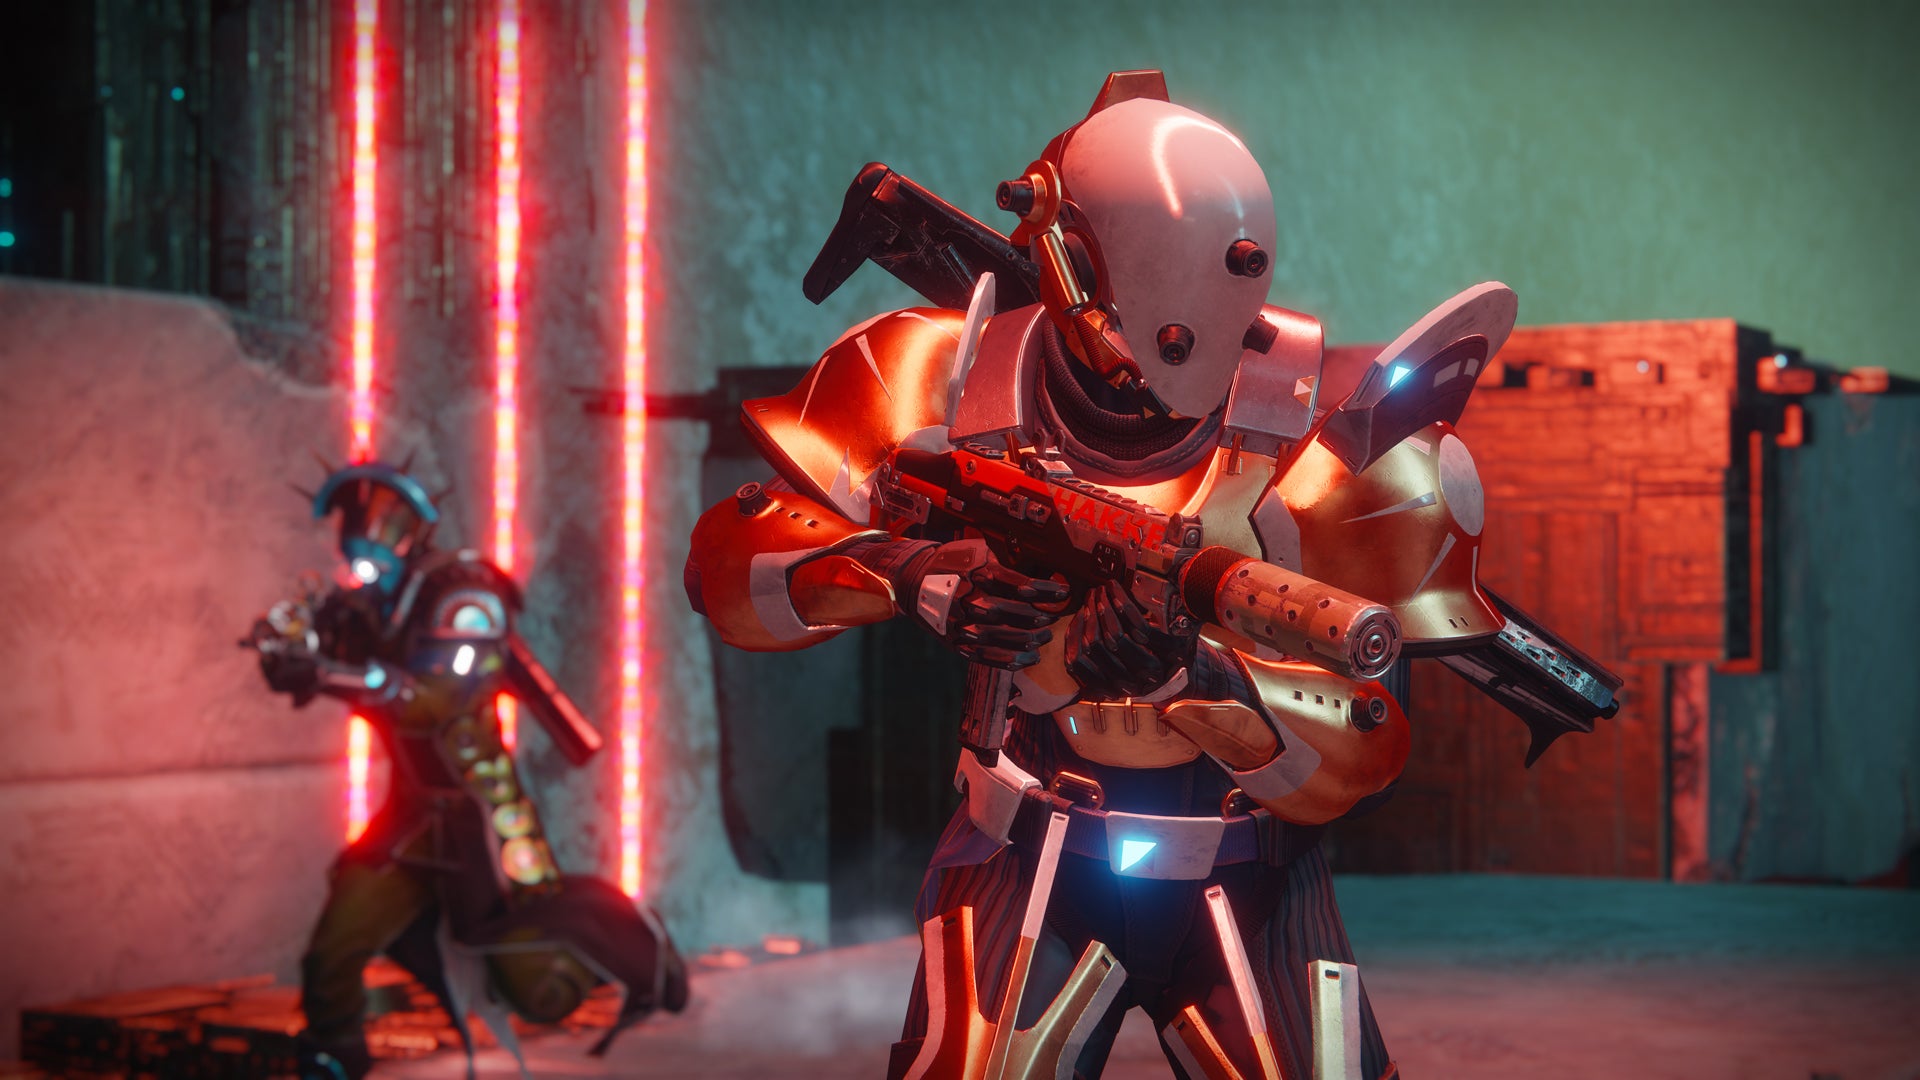 Image for Destiny 2 hotfix 1.1.4.1 is live alongside the Weekly Reset